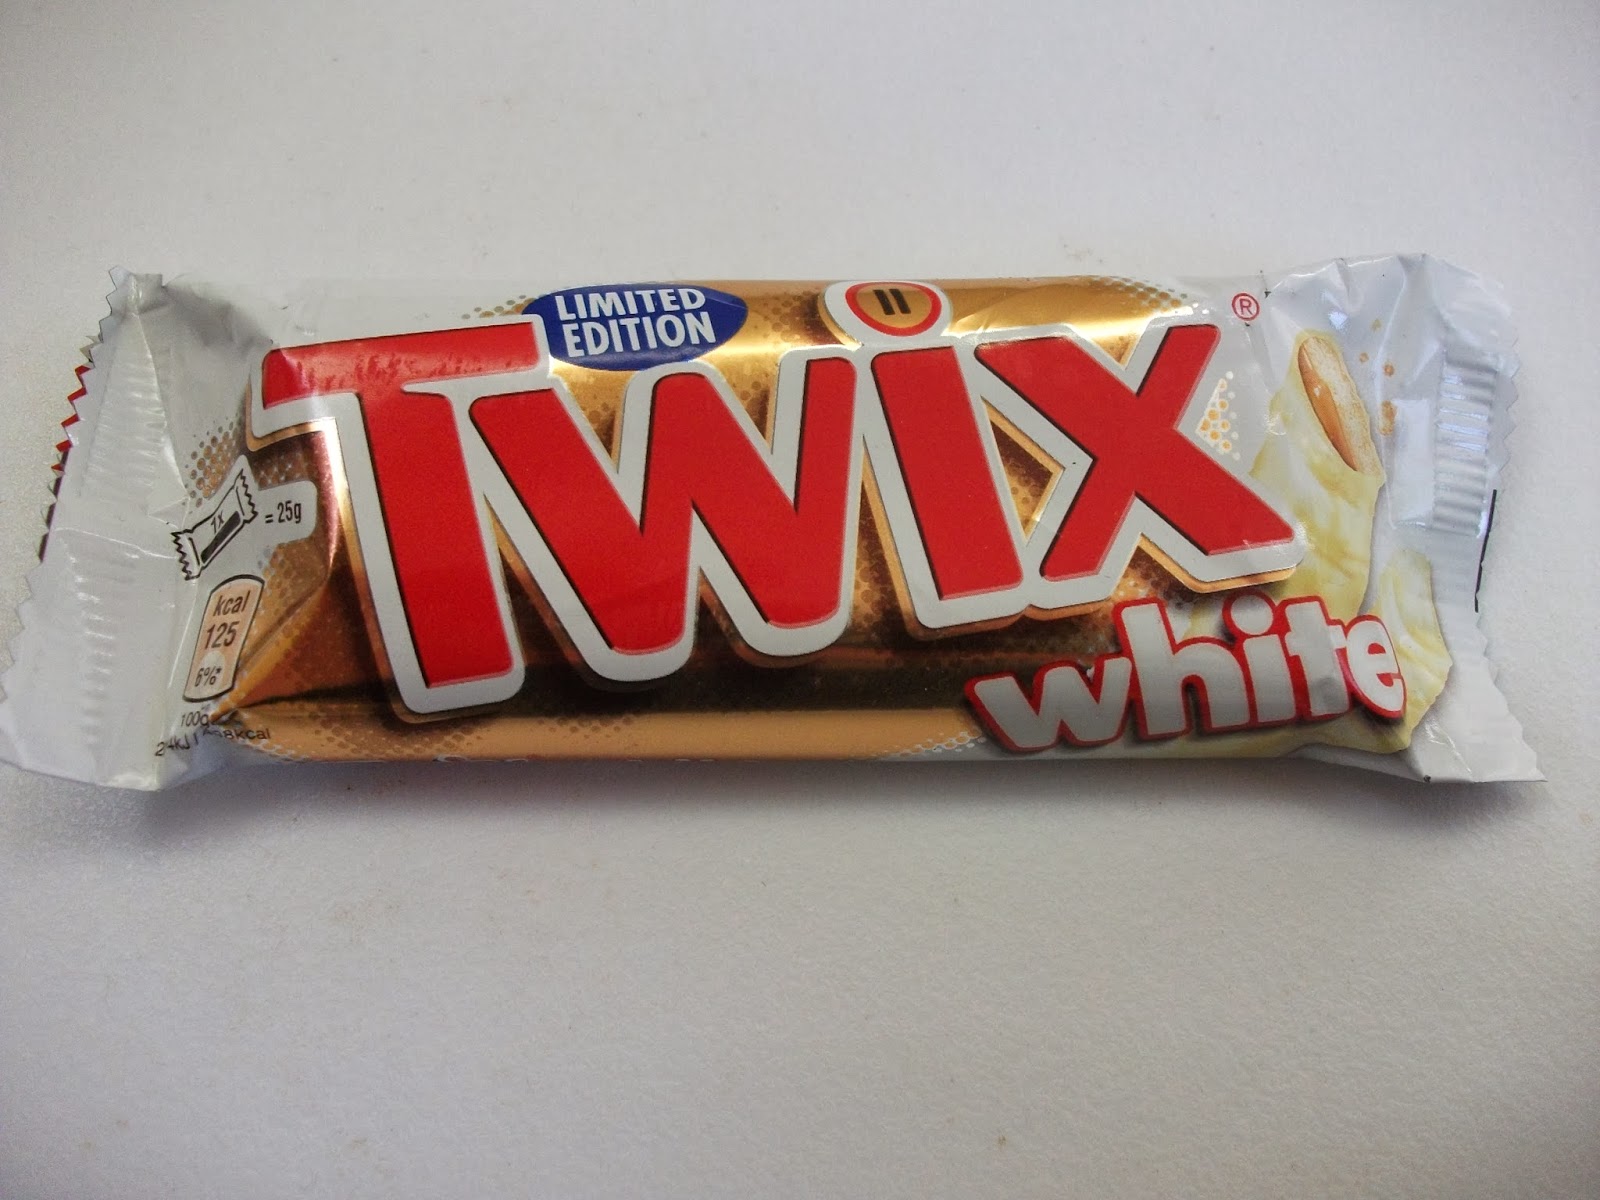 White Chocolate Twix - Limited Edition Review
